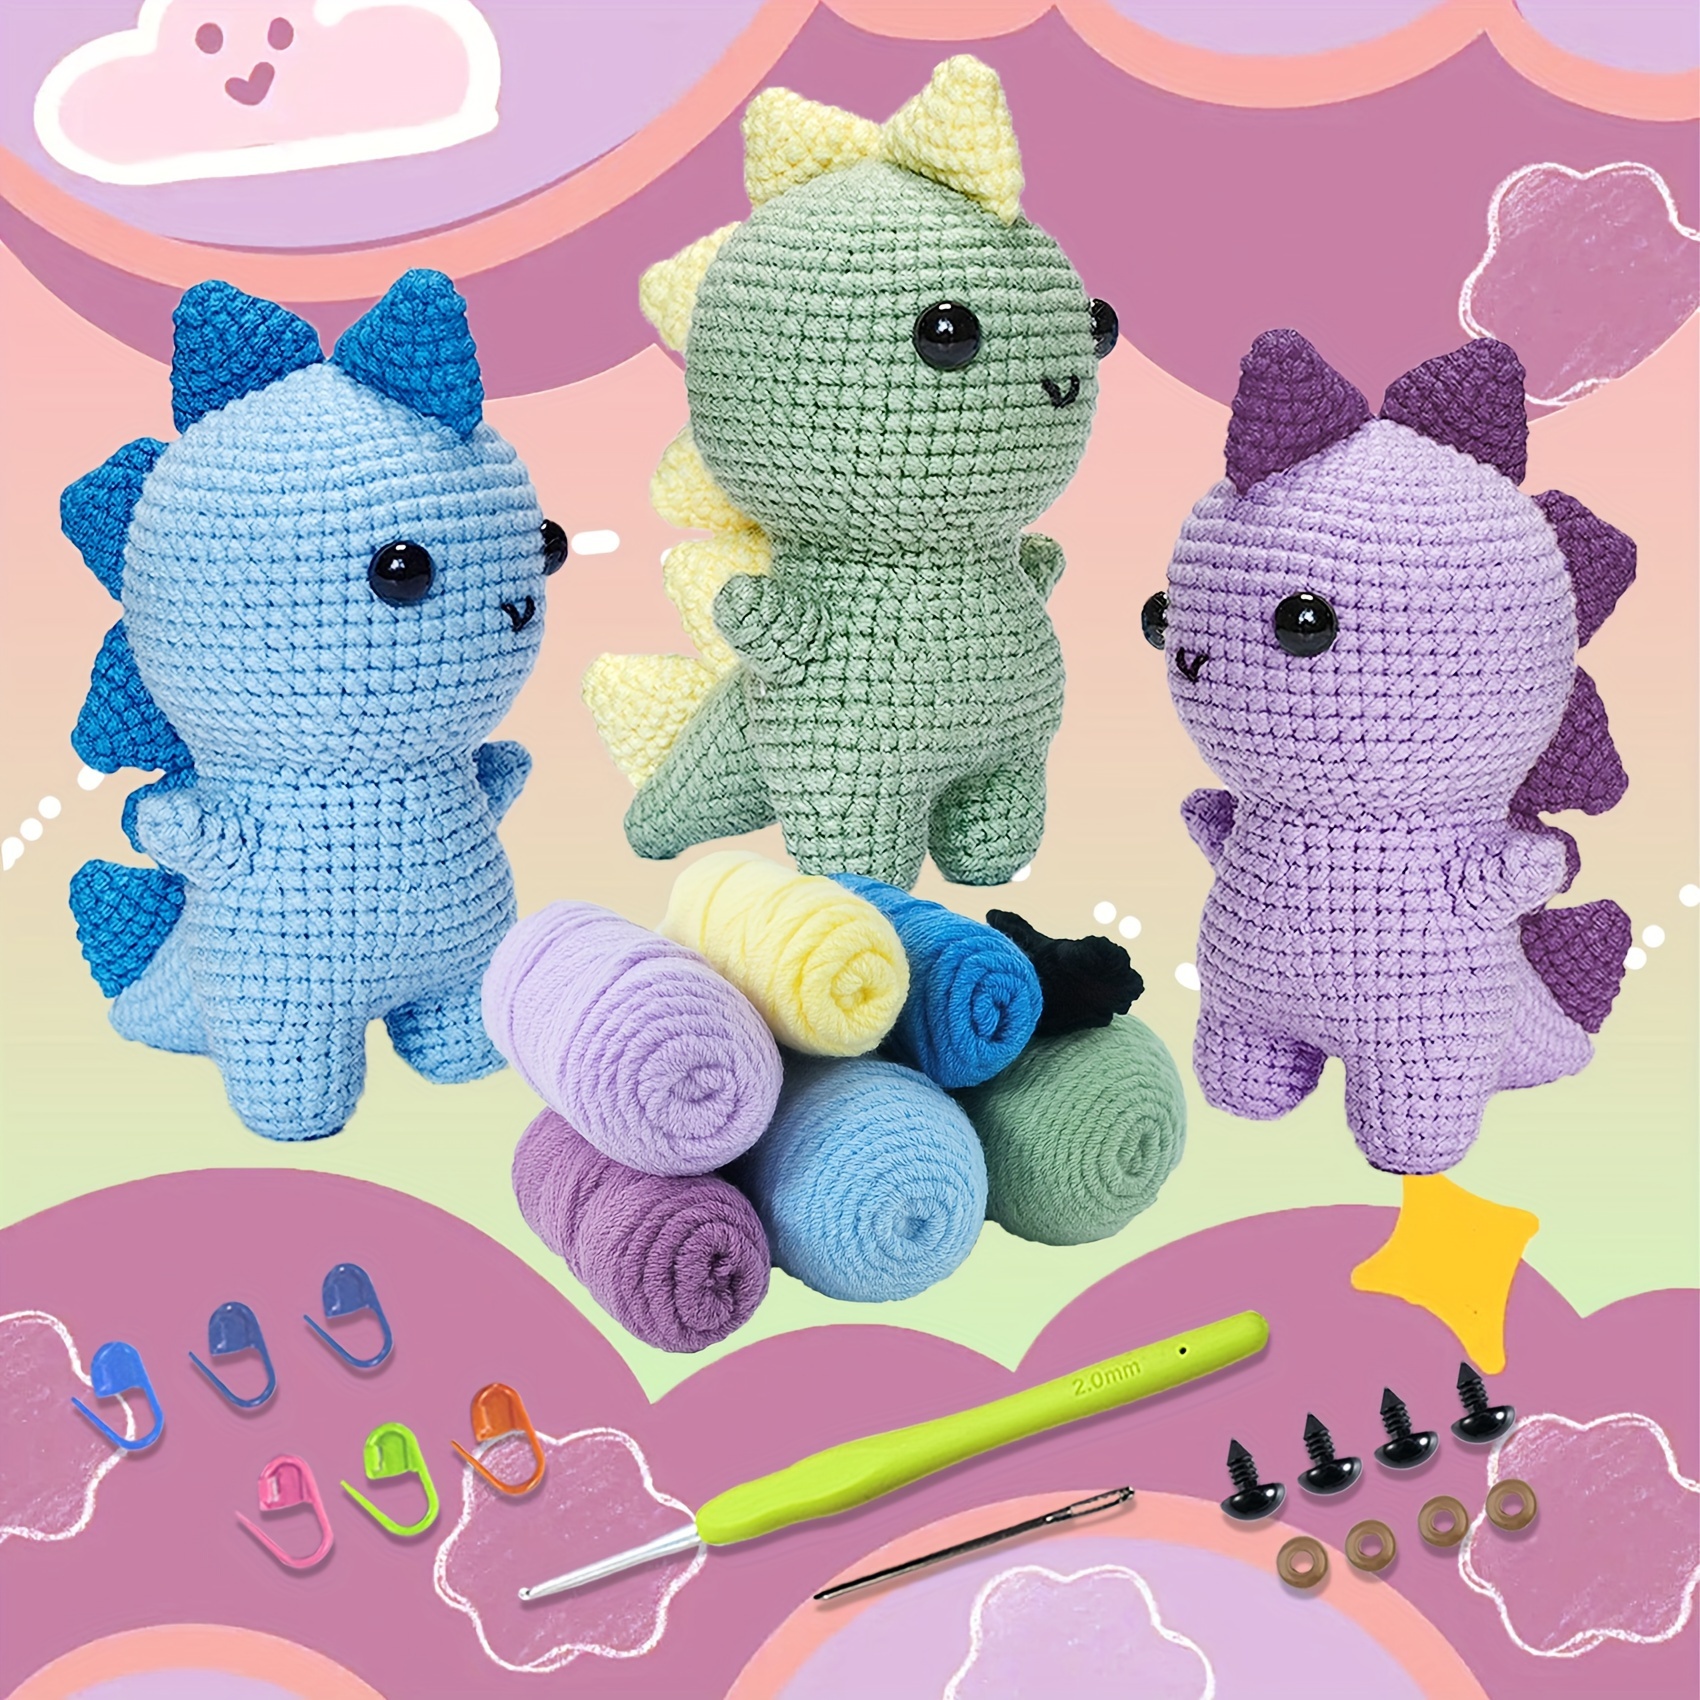 

Jeslon Beginner Crochet Kit With Video Tutorial - Complete Set For Diy Animal Dolls, Includes Yarn & Hooks (tools In Assorted Colors) - Purple/green/blue